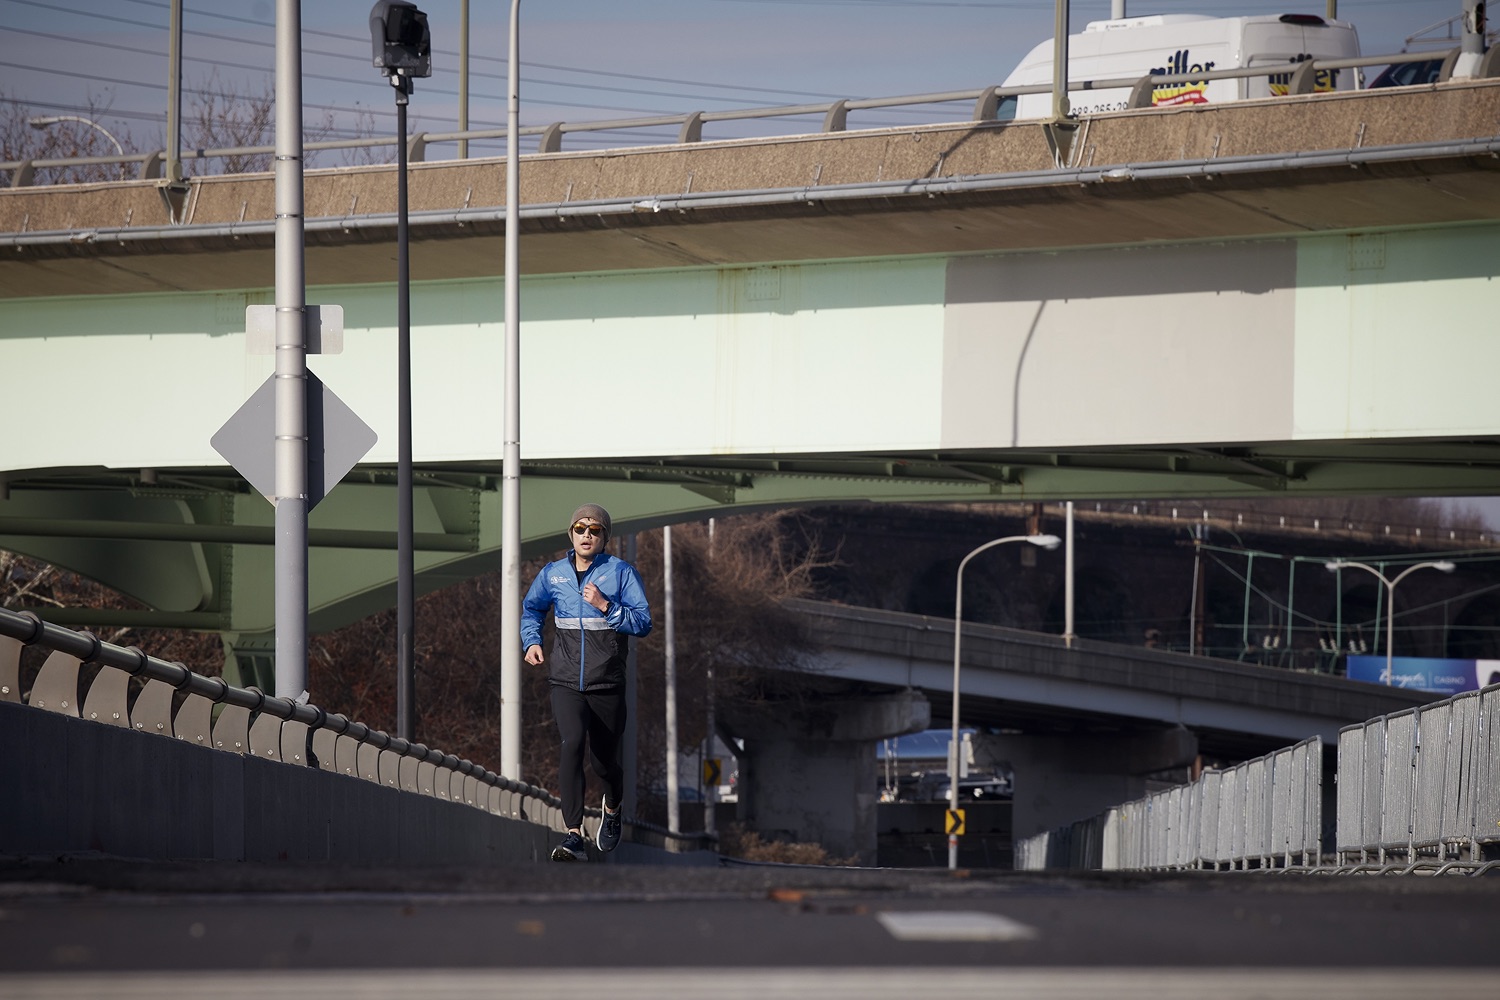 A runner on the damaged Martin Luther King Jr Dr. Bridge, which has been closed to vehicular traffic.  Governor Tom Wolf stood alongside U.S. Transportation Secretary Pete Buttigieg to launch the largest bridge formula program in American history, made possible by the passage of the Bipartisan Infrastructure Law. Pennsylvania is set to receive $1.6 billion to fix more than 3,000 bridges across the commonwealth.  Philadelphia, PA  January 14, 2021<br><a href="https://filesource.amperwave.net/commonwealthofpa/photo/20426_gov_bridgeAnnoucement_dz_012_copy.jpg" target="_blank">⇣ Download Photo</a>